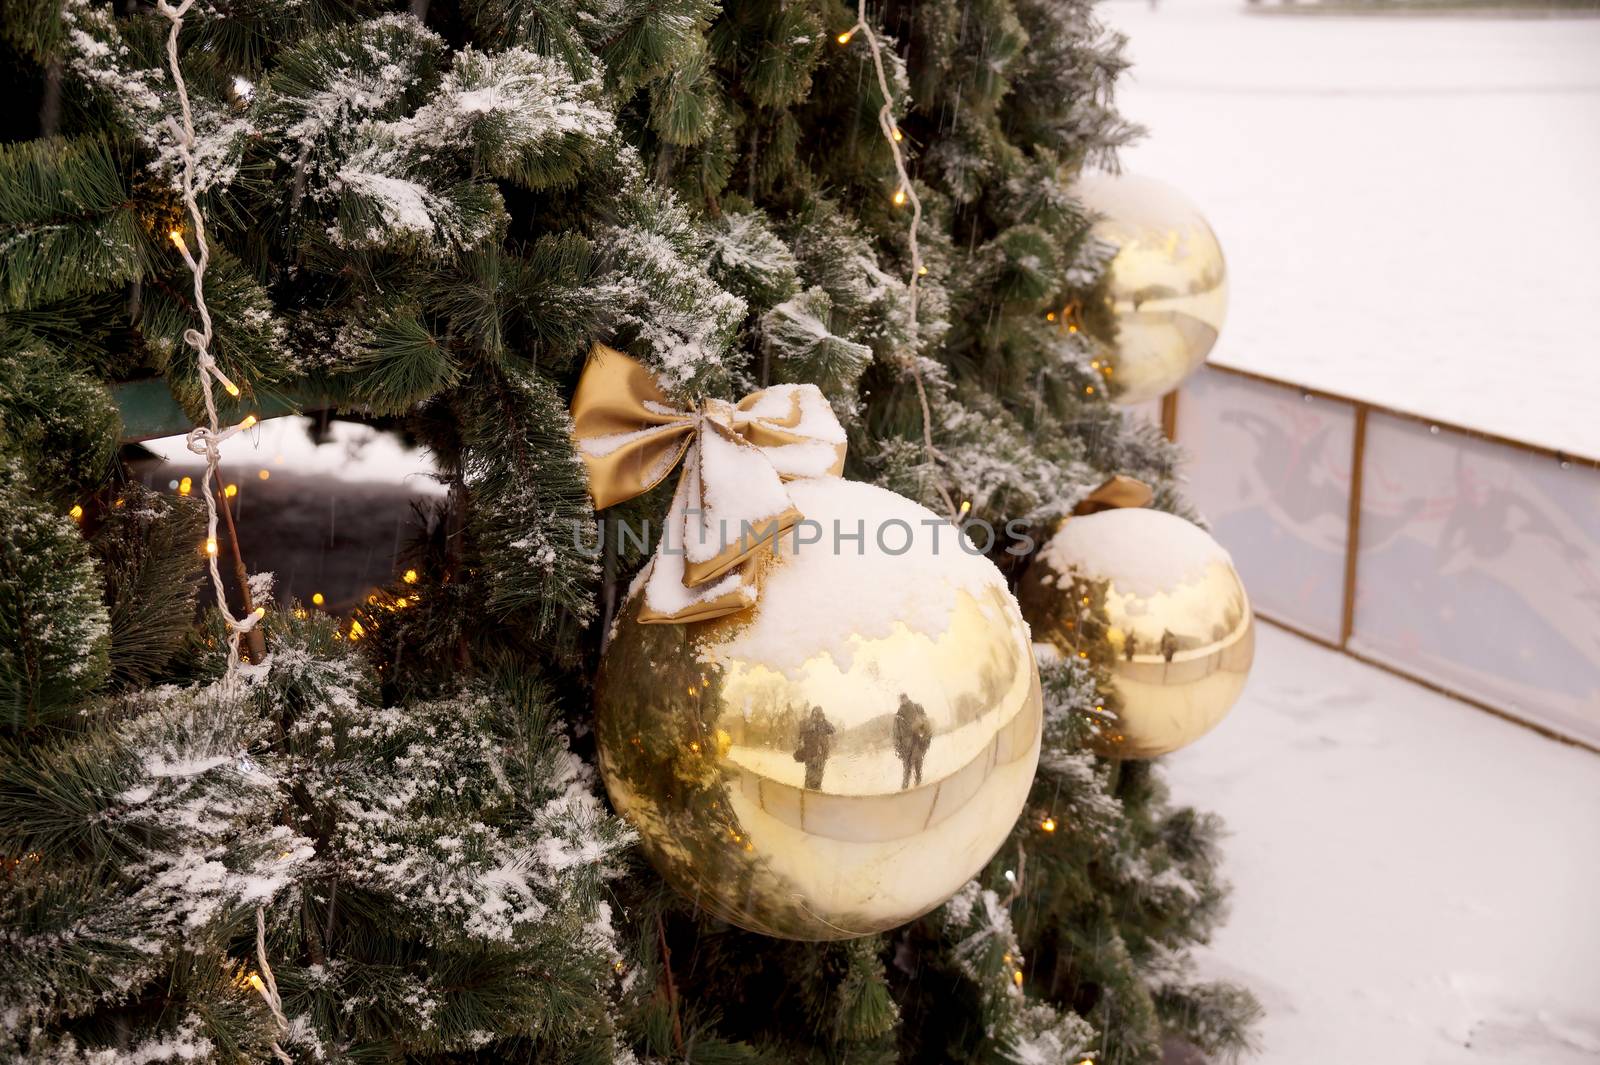 Christmas decoration of shopping center spheres, bows and branches of a fir-tree